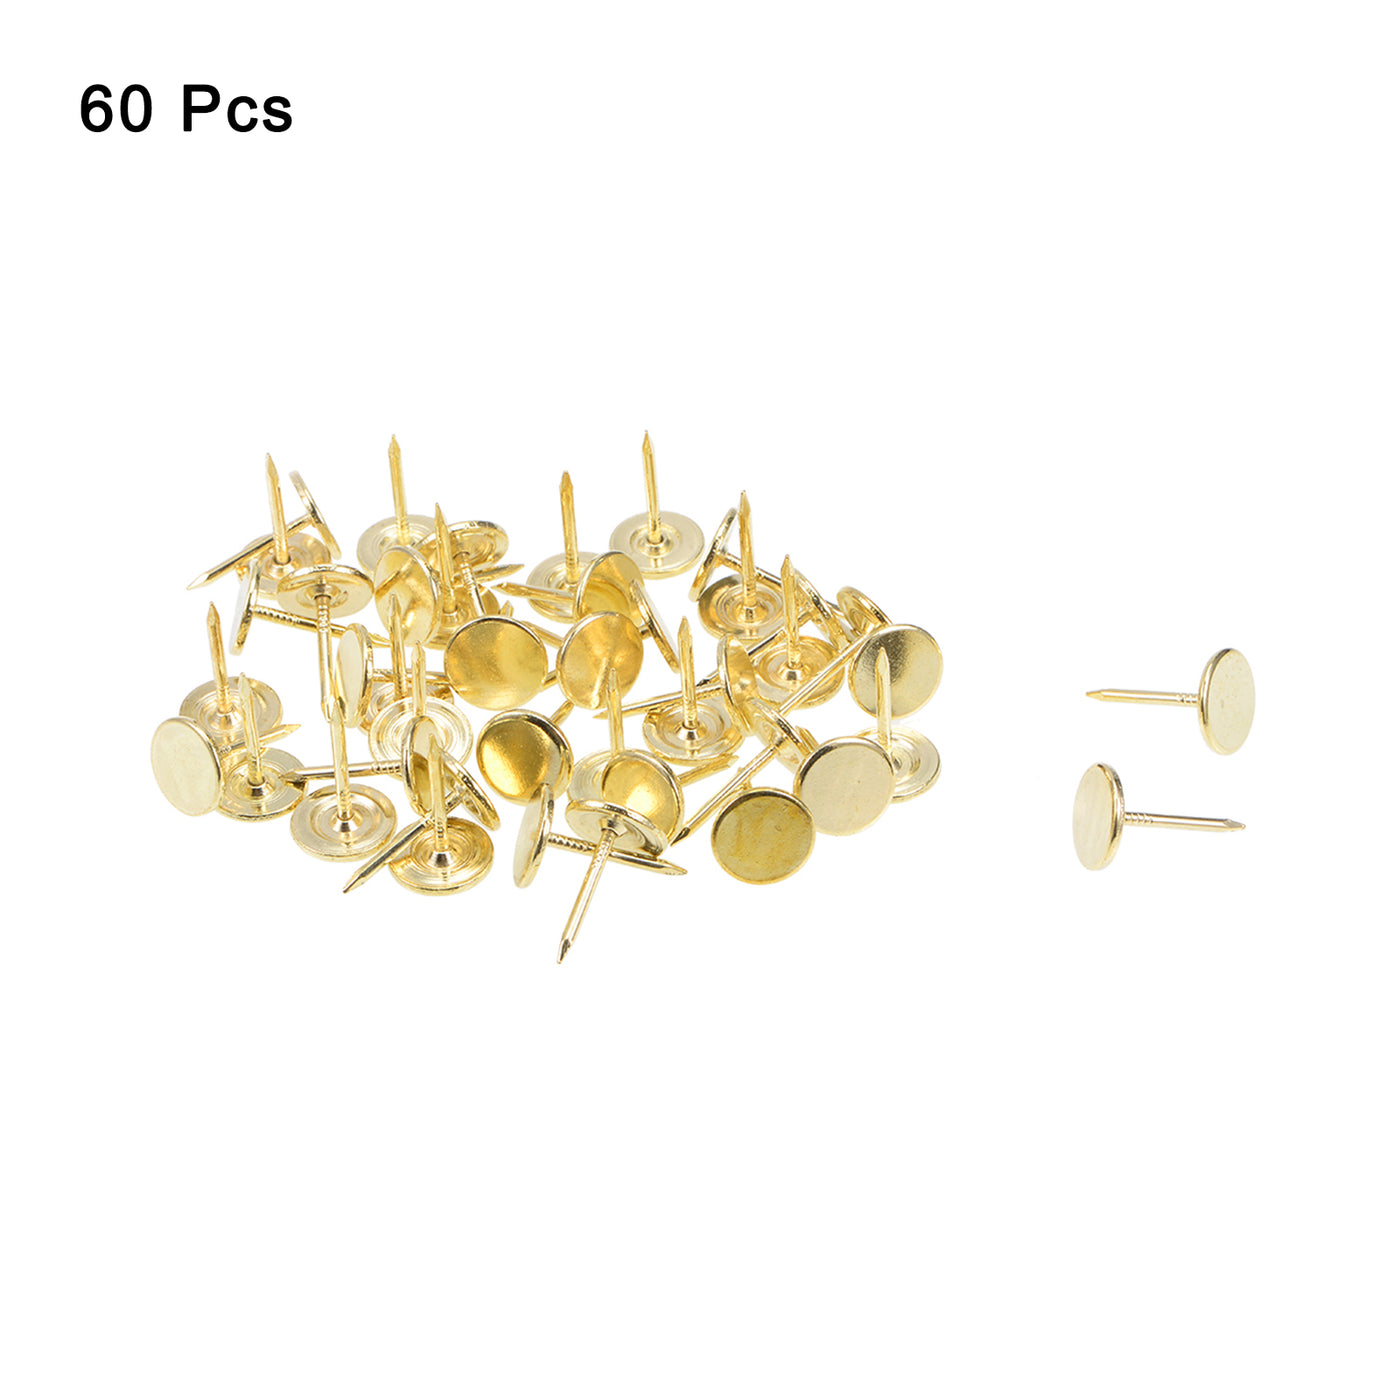 uxcell Uxcell 60Pcs 11mmx17mm Flat Head Decorative Upholstery Tacks Furniture Nails, Gold